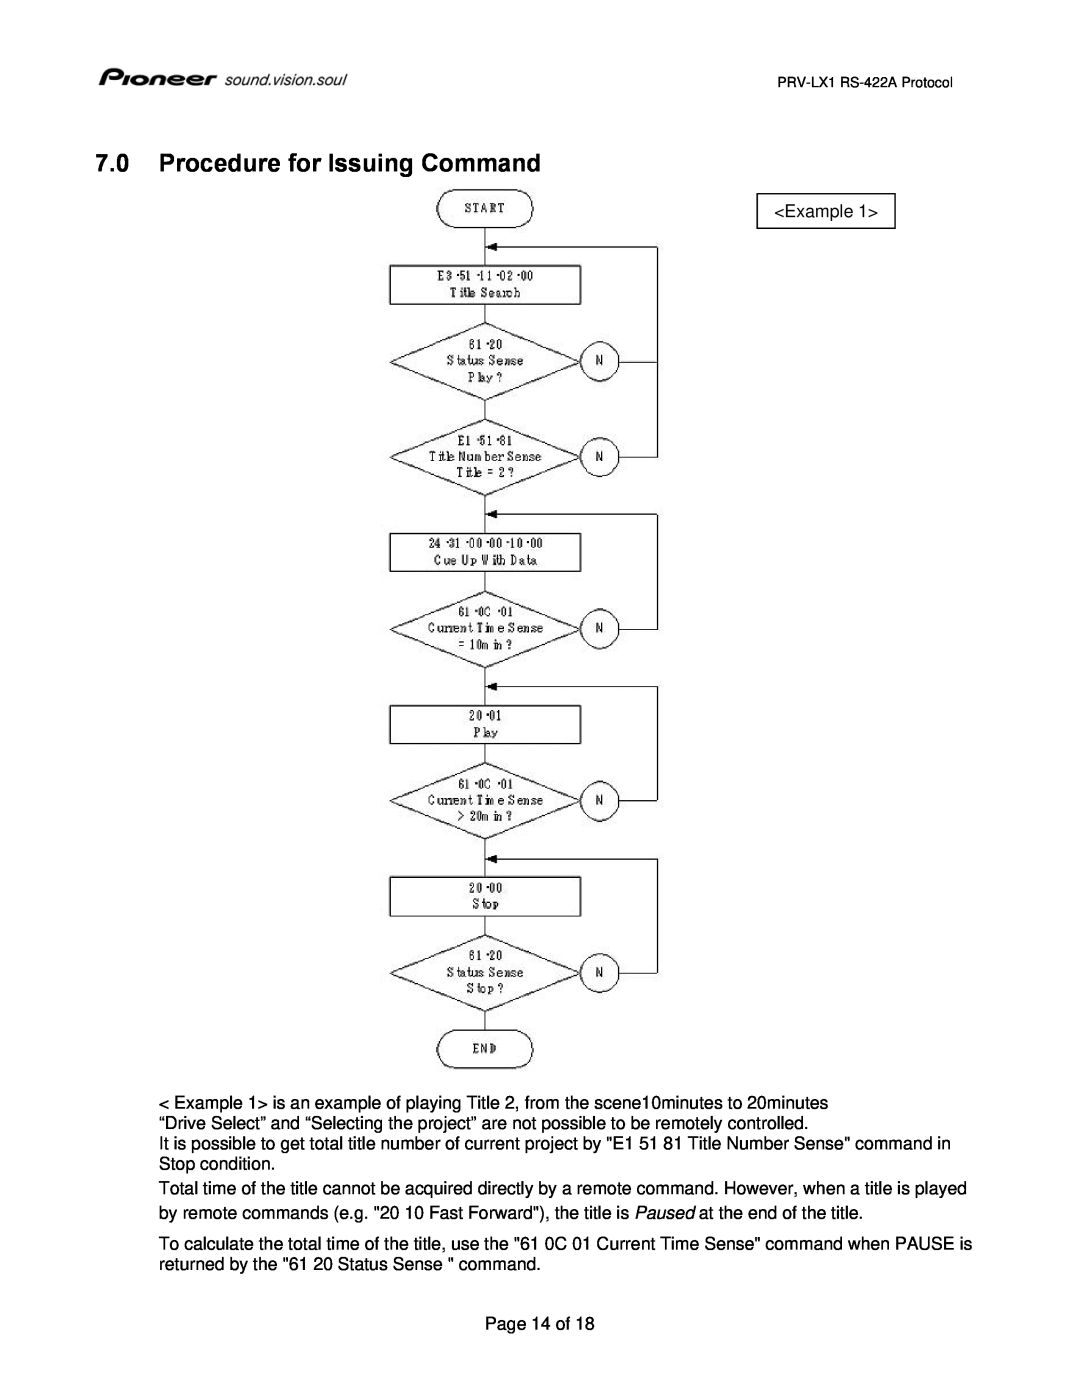 Pioneer PRV-LX1 manual 7.0Procedure for Issuing Command 